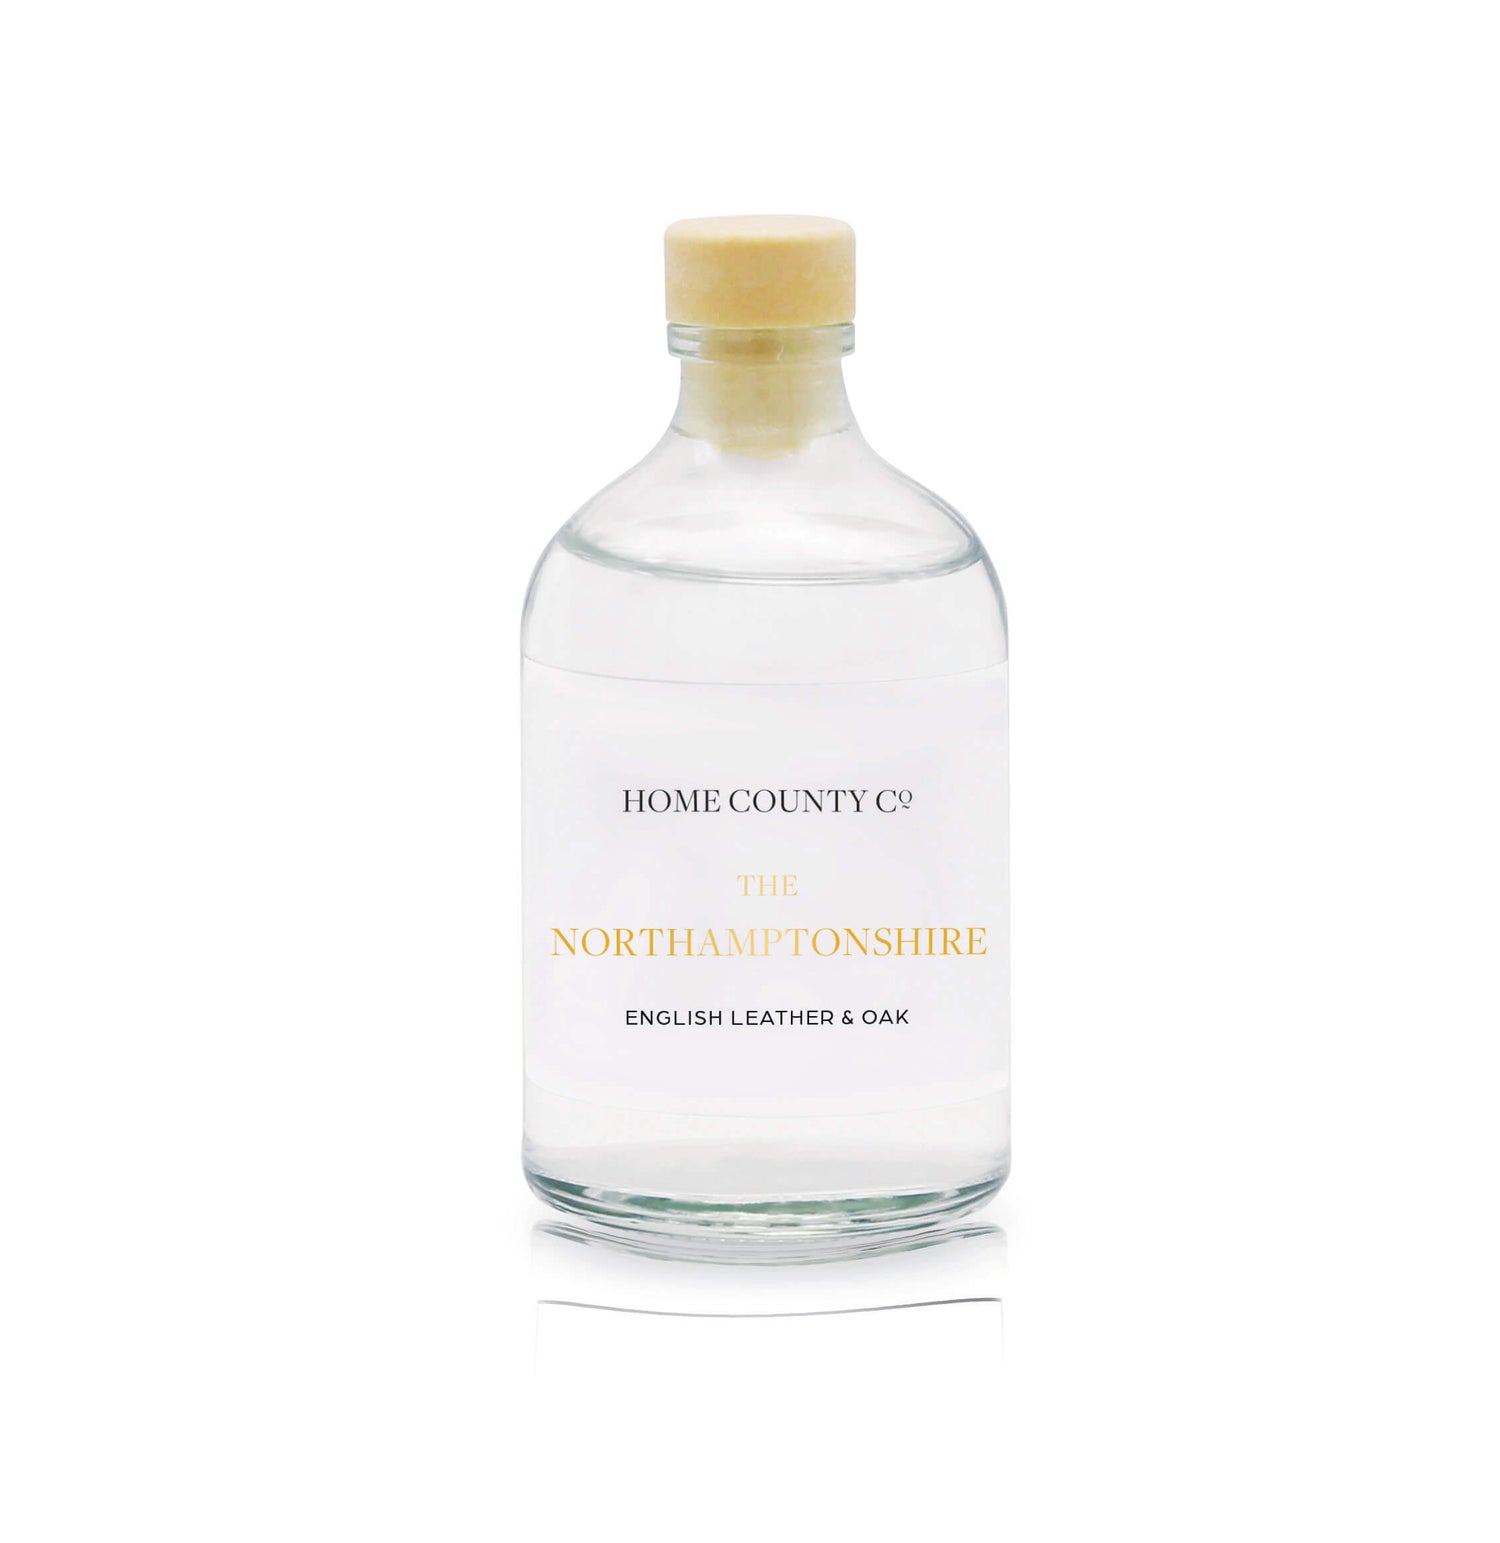 A English leather and oak reed diffuser refill is shown in a recyclable glass bottle